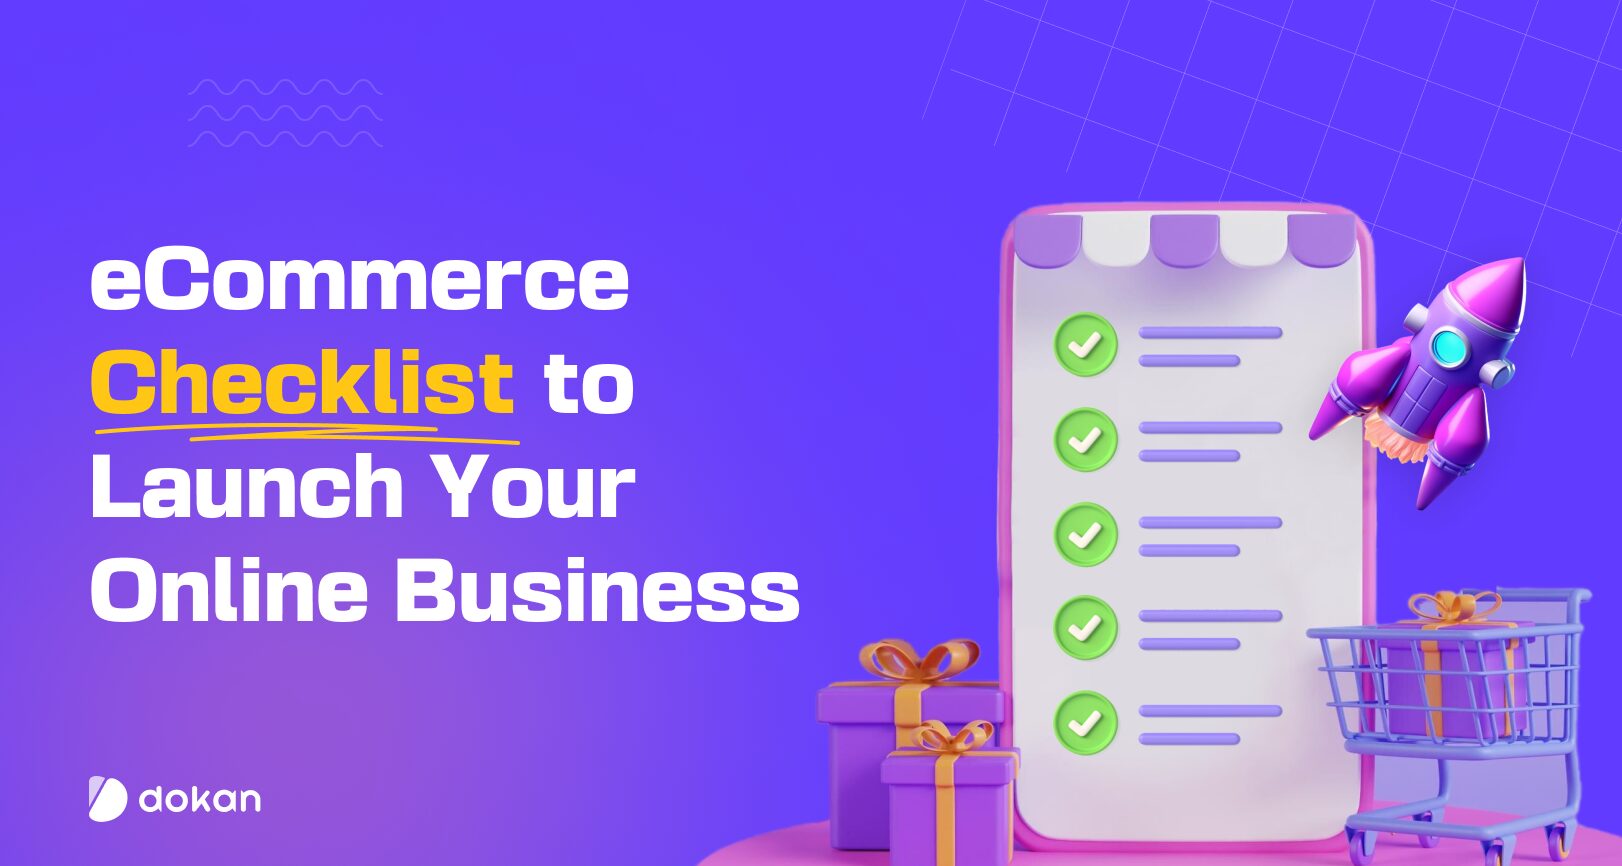 This is the feature image of eCommerce checklist to launch your online business